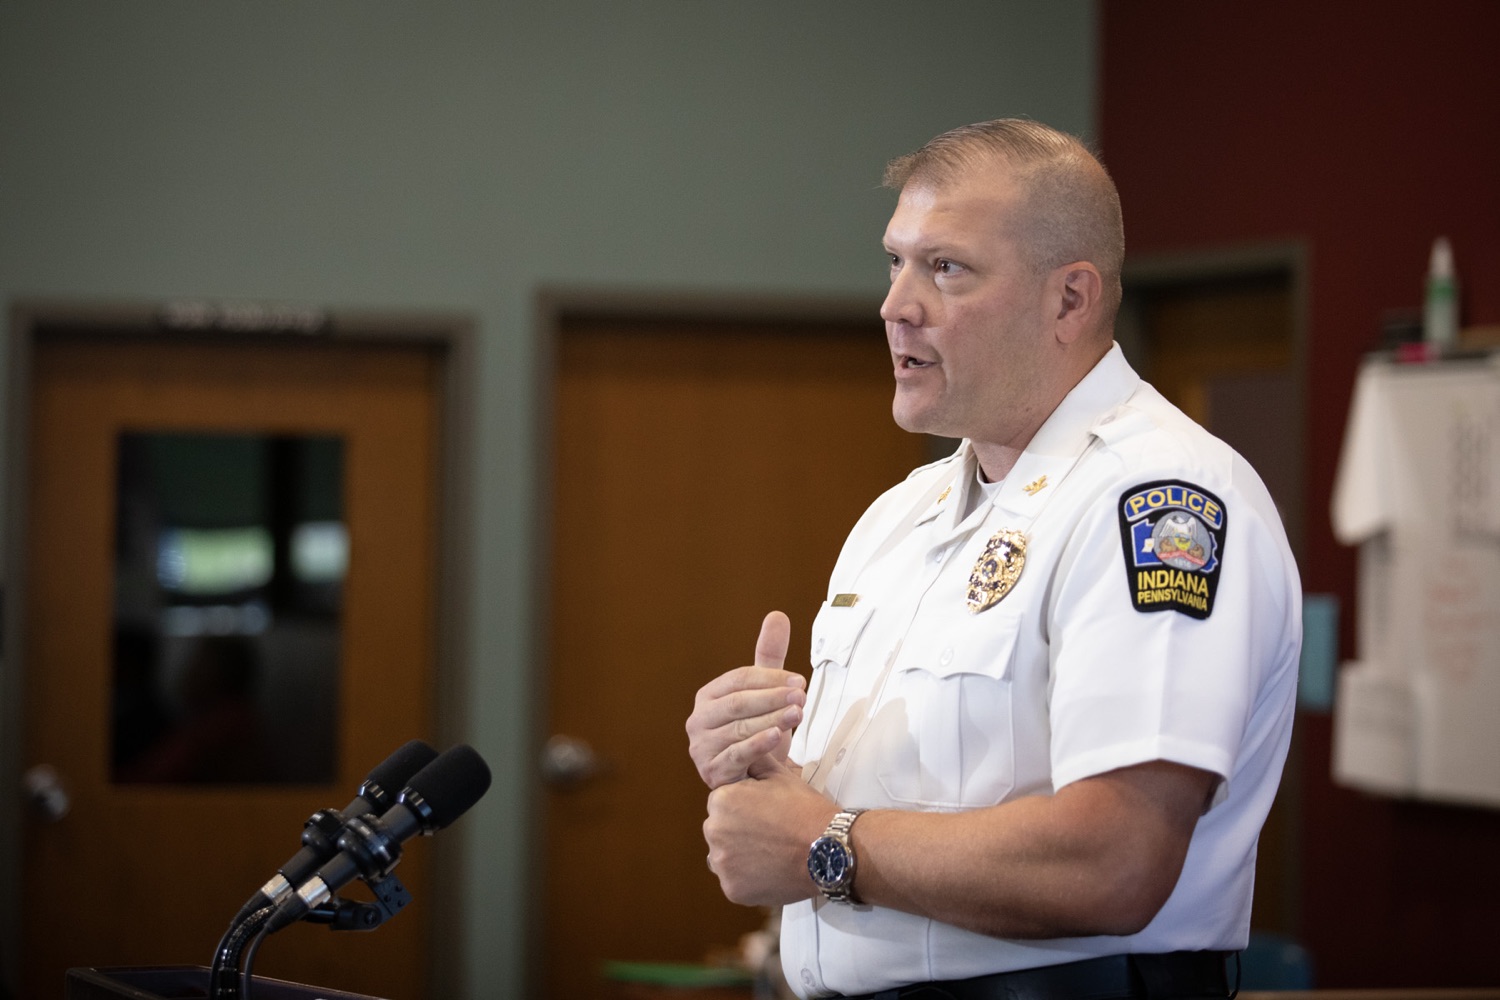 The Pennsylvania Commission on Crime and Delinquency (PCCD), visited the Indiana Area School District to highlight their work with School Mental Health & Safety and Security funding provided through PCCDs School Safety and Security Committee, and to encourage schools to participate in the 2023-24 Pennsylvania Youth Survey (PAYS). Pictured here is Justin Schawl, Indiana Borough Chief of Police, delivering remarks during the event. Harrisburg, Pennsylvania. September 15, 2023.<br><a href="https://filesource.amperwave.net/commonwealthofpa/photo/23673_pccd_indianaSD_JP_17.jpg" target="_blank">⇣ Download Photo</a>